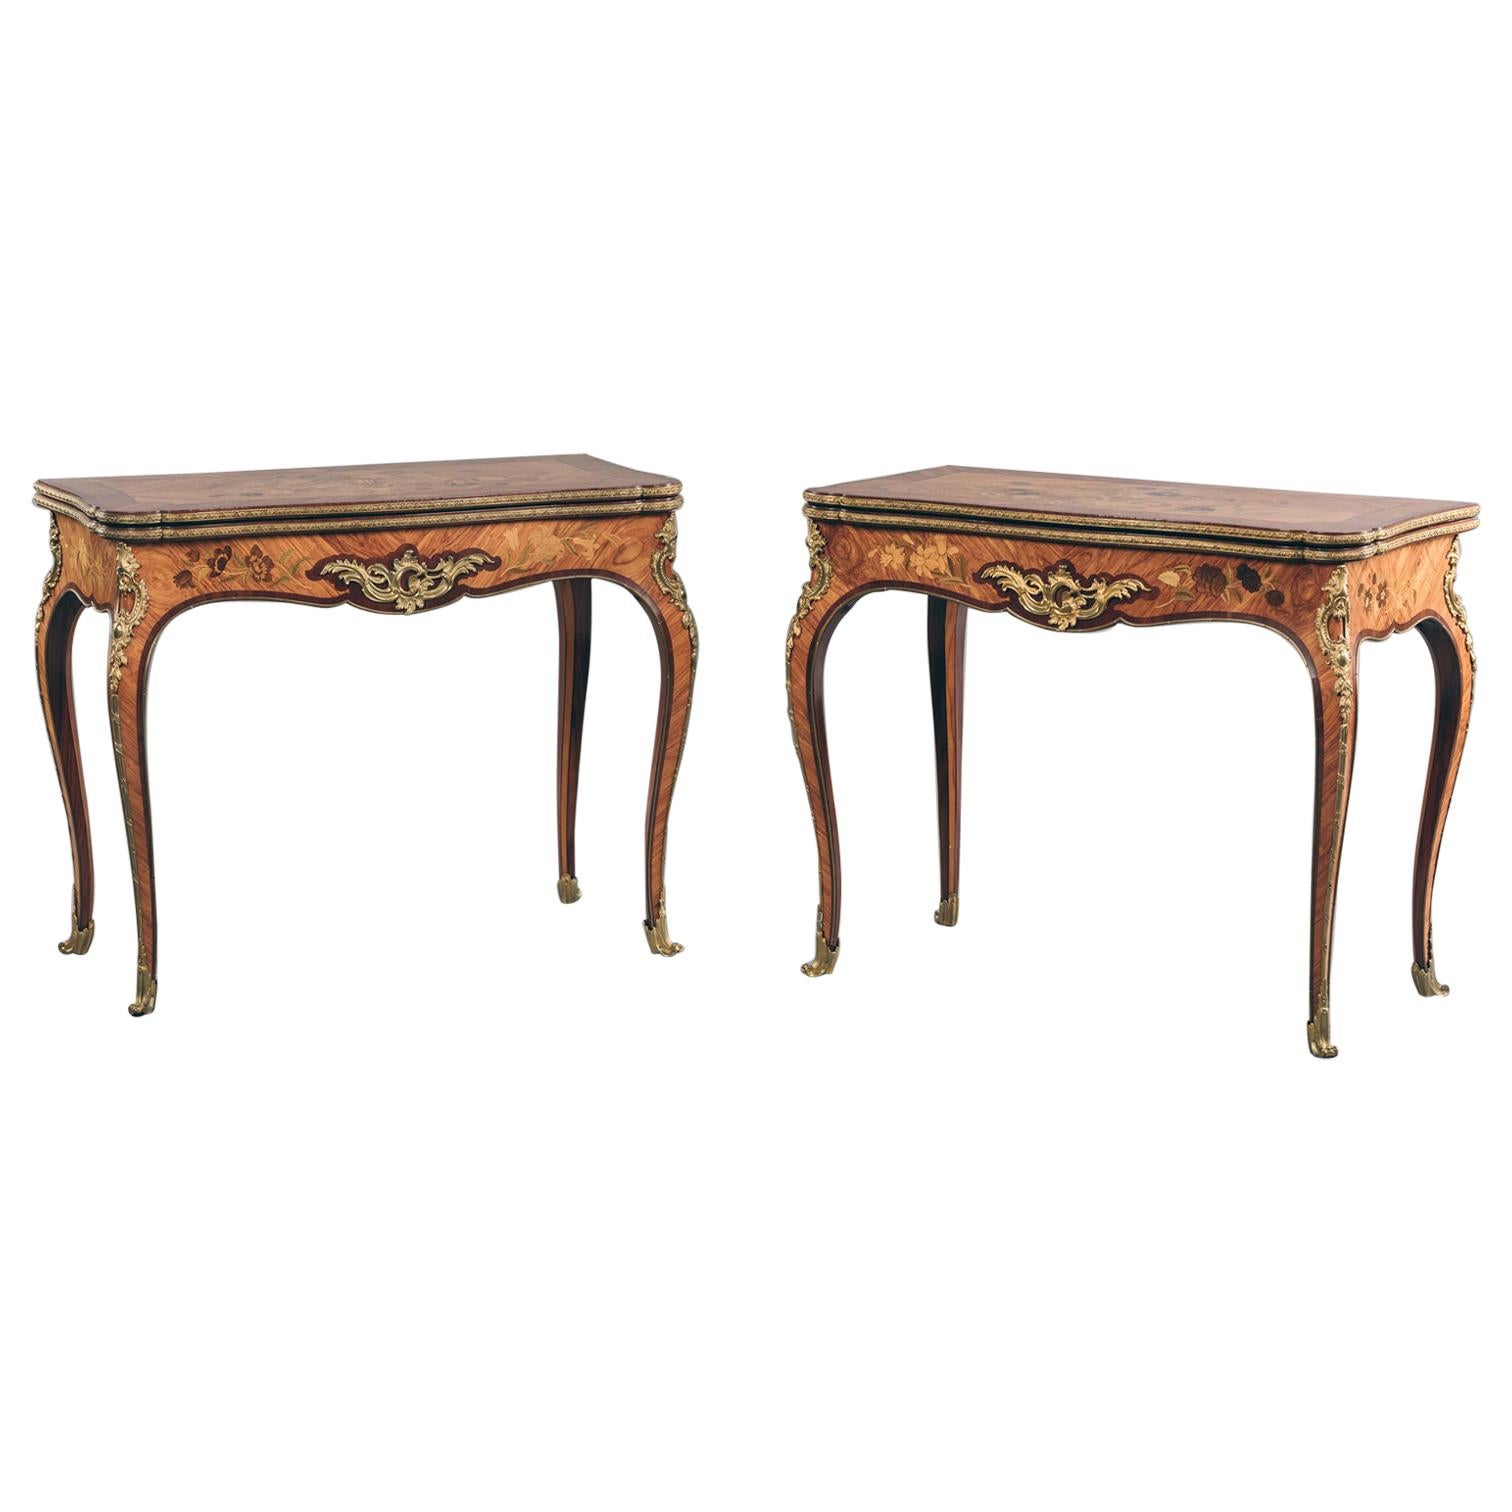 Pair of 19th Century French Louis XV Style Marquetry Inlaid Card Tables For Sale